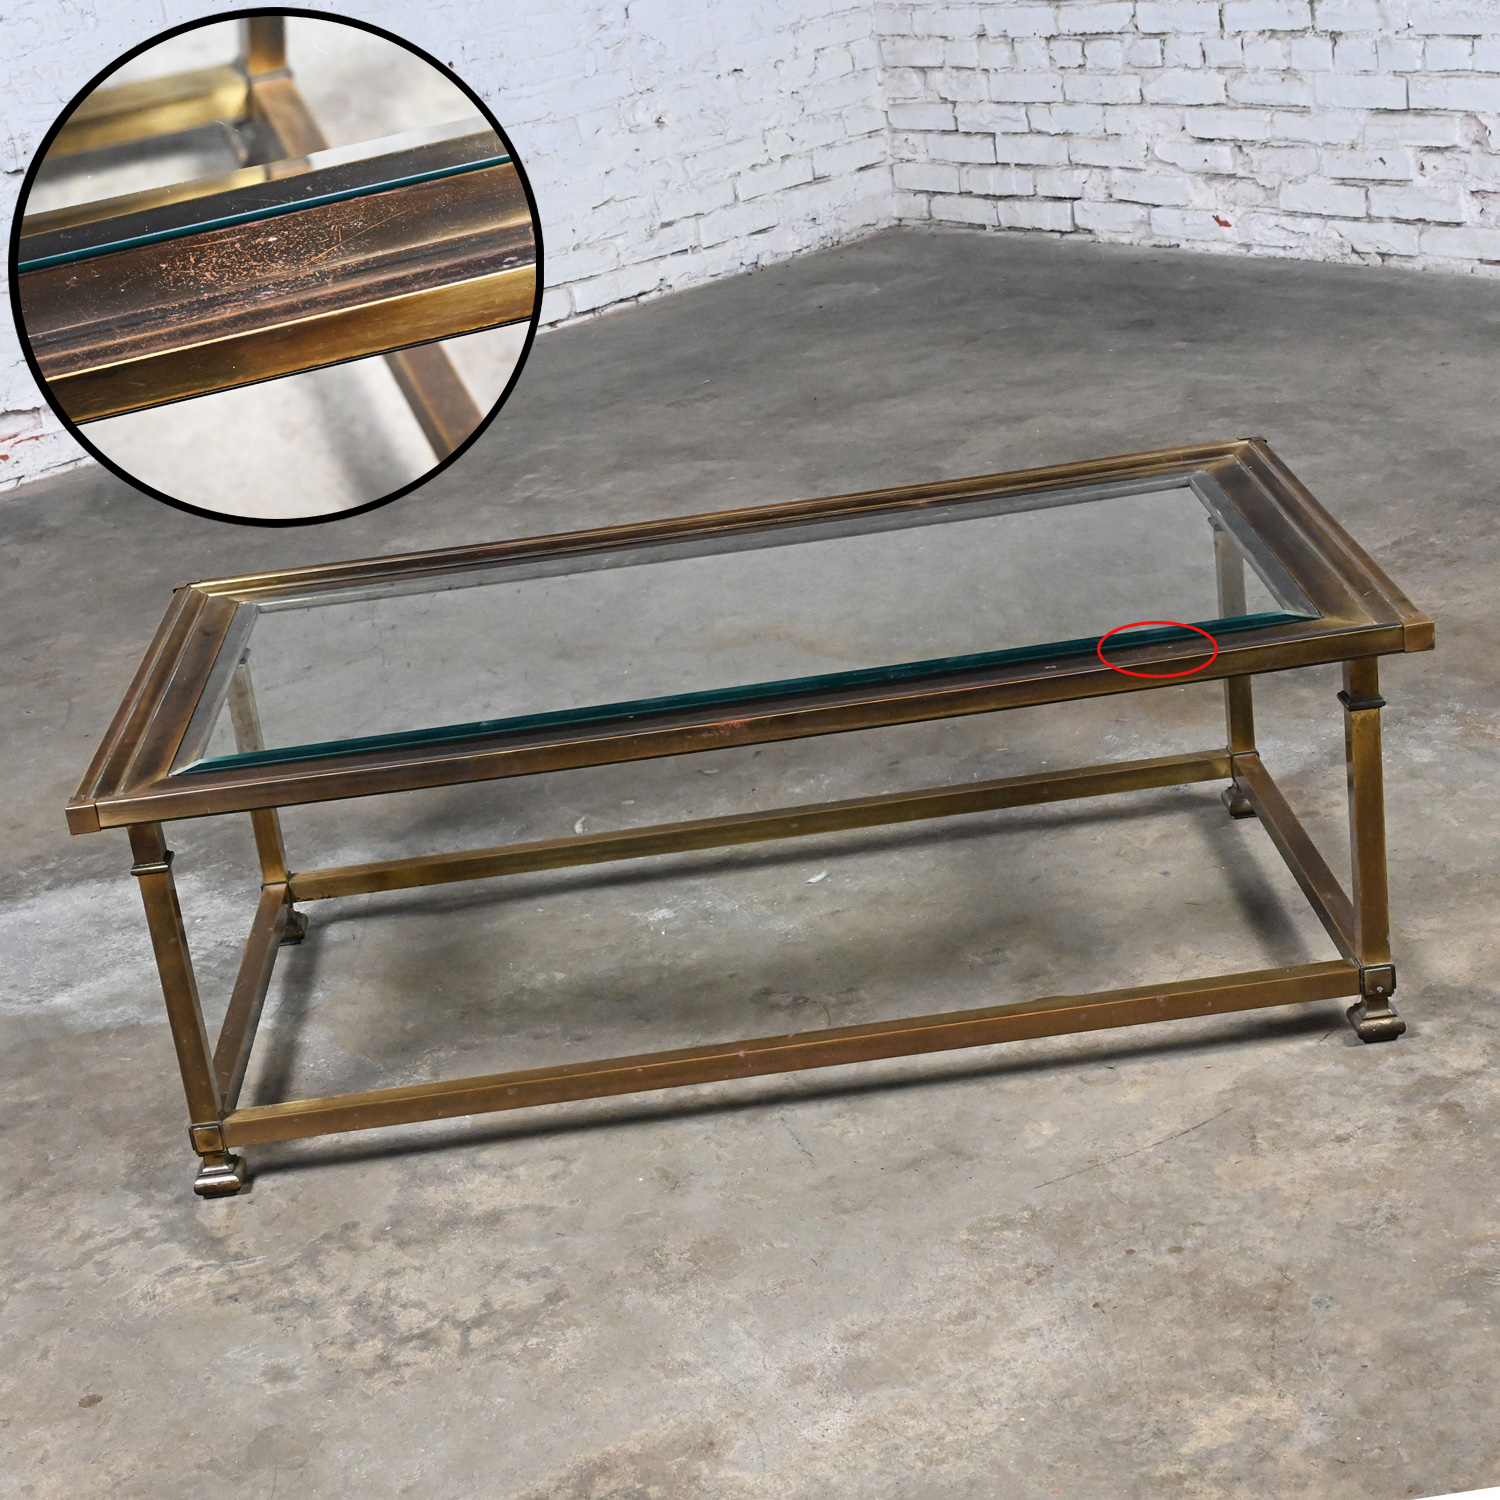 Late 20th Century Coffee Table Style Mastercraft Rectangular Antiqued Brass Frame Beveled Glass Top